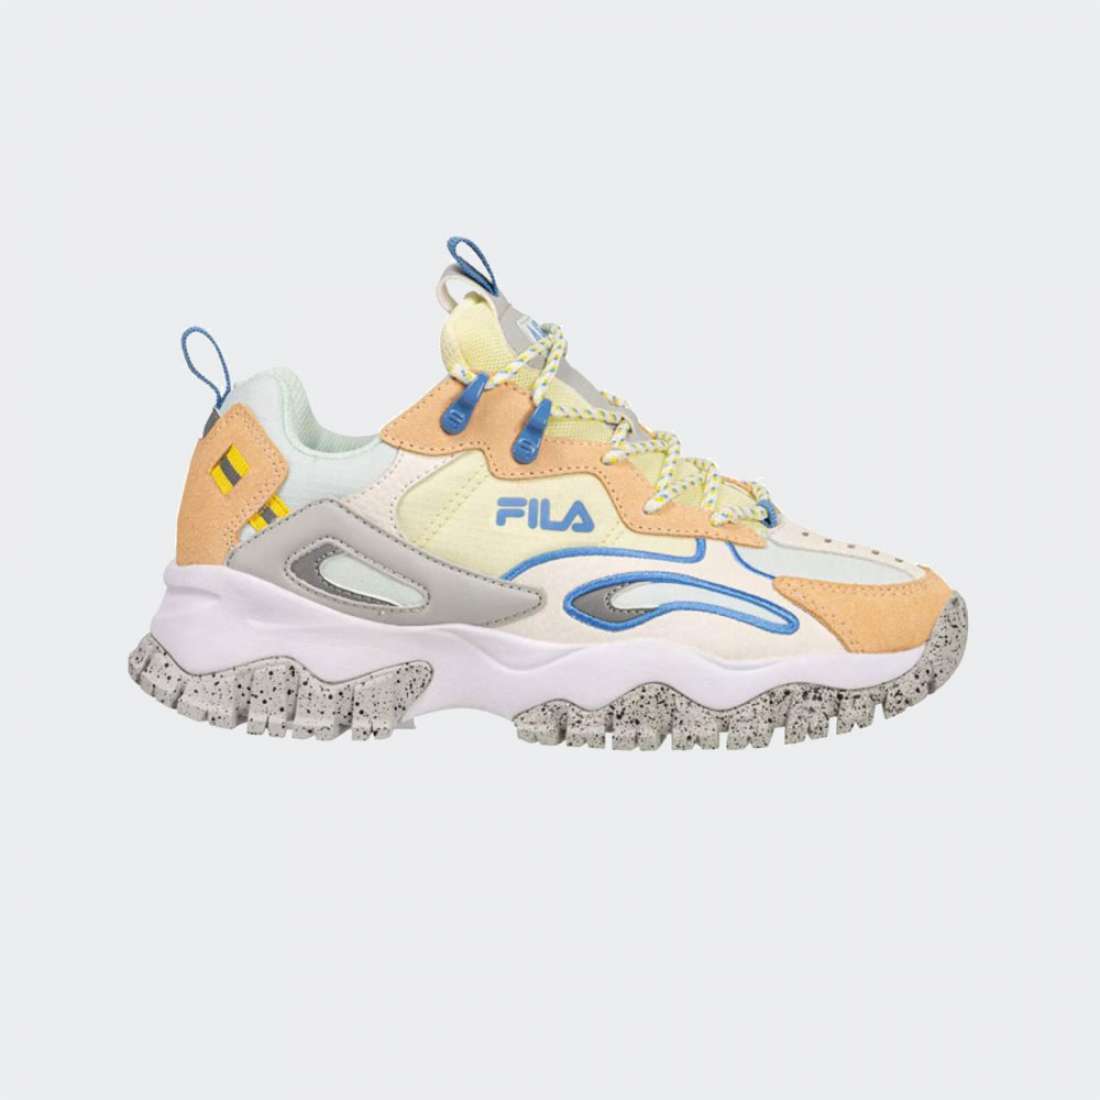 FILA RAY TRACER TR2 HINT OF MINT/PEAR SORBET